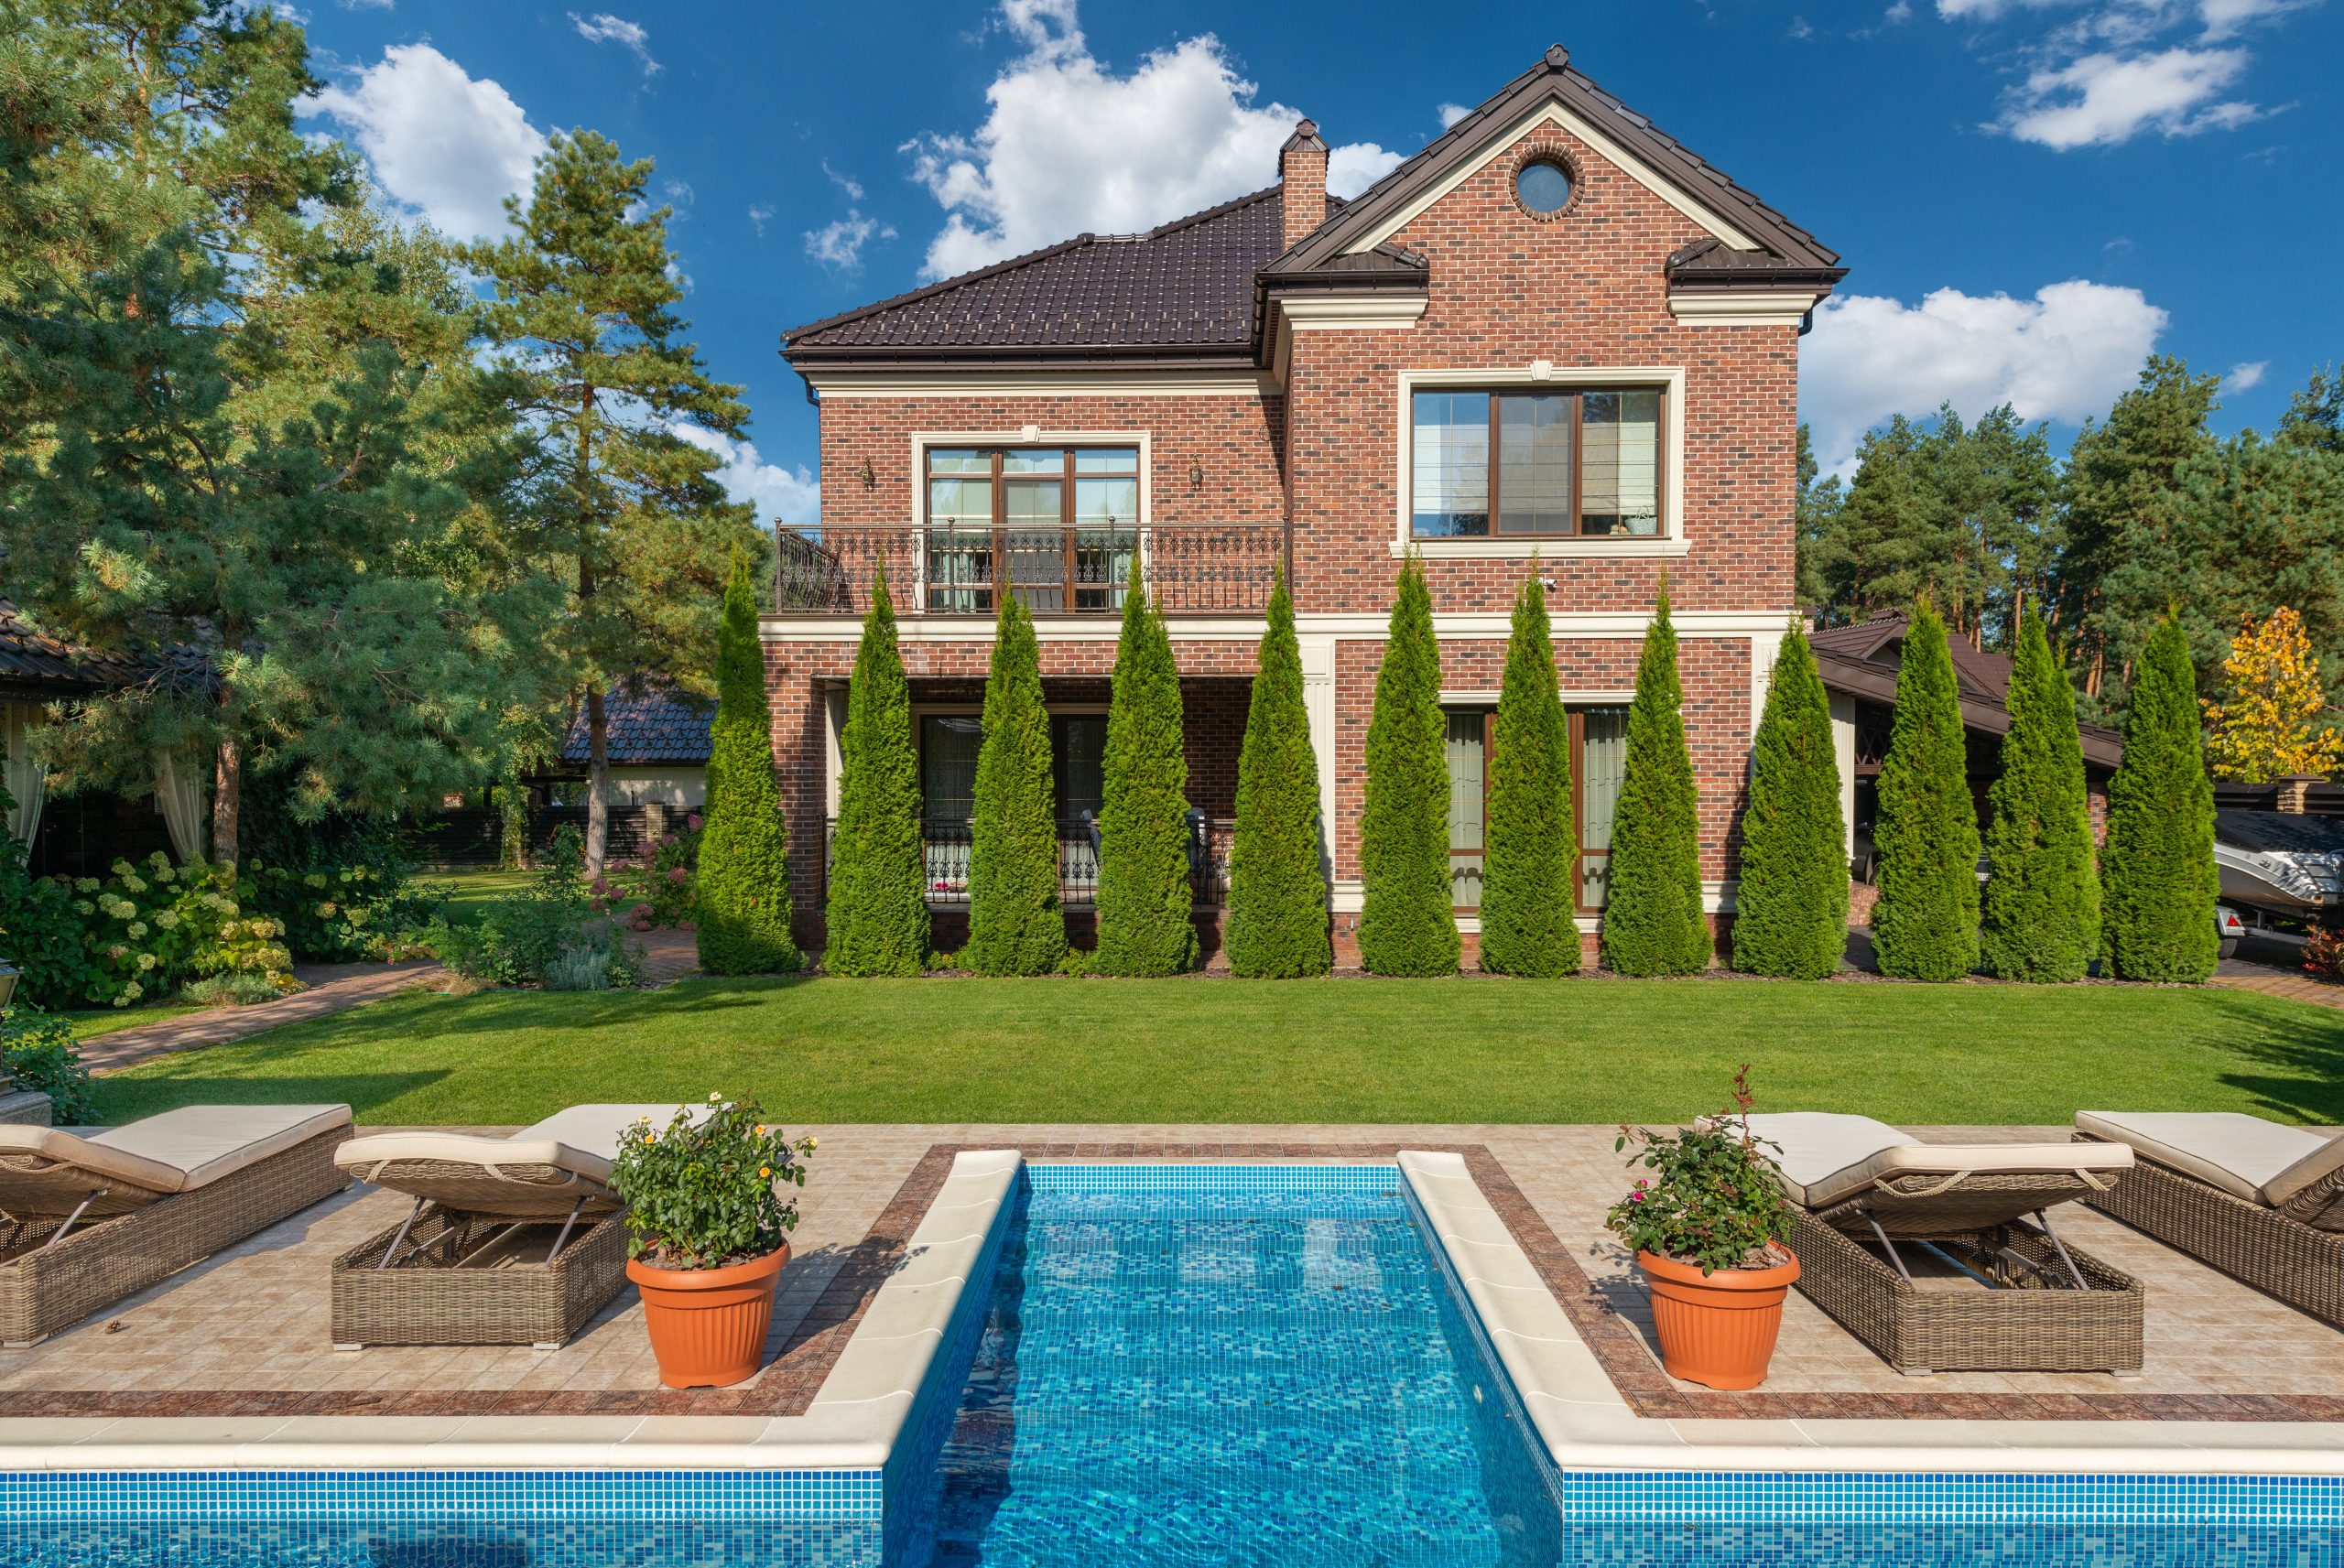 Image of a fancy brick home with elaborate landscaping financed with a home equity loan